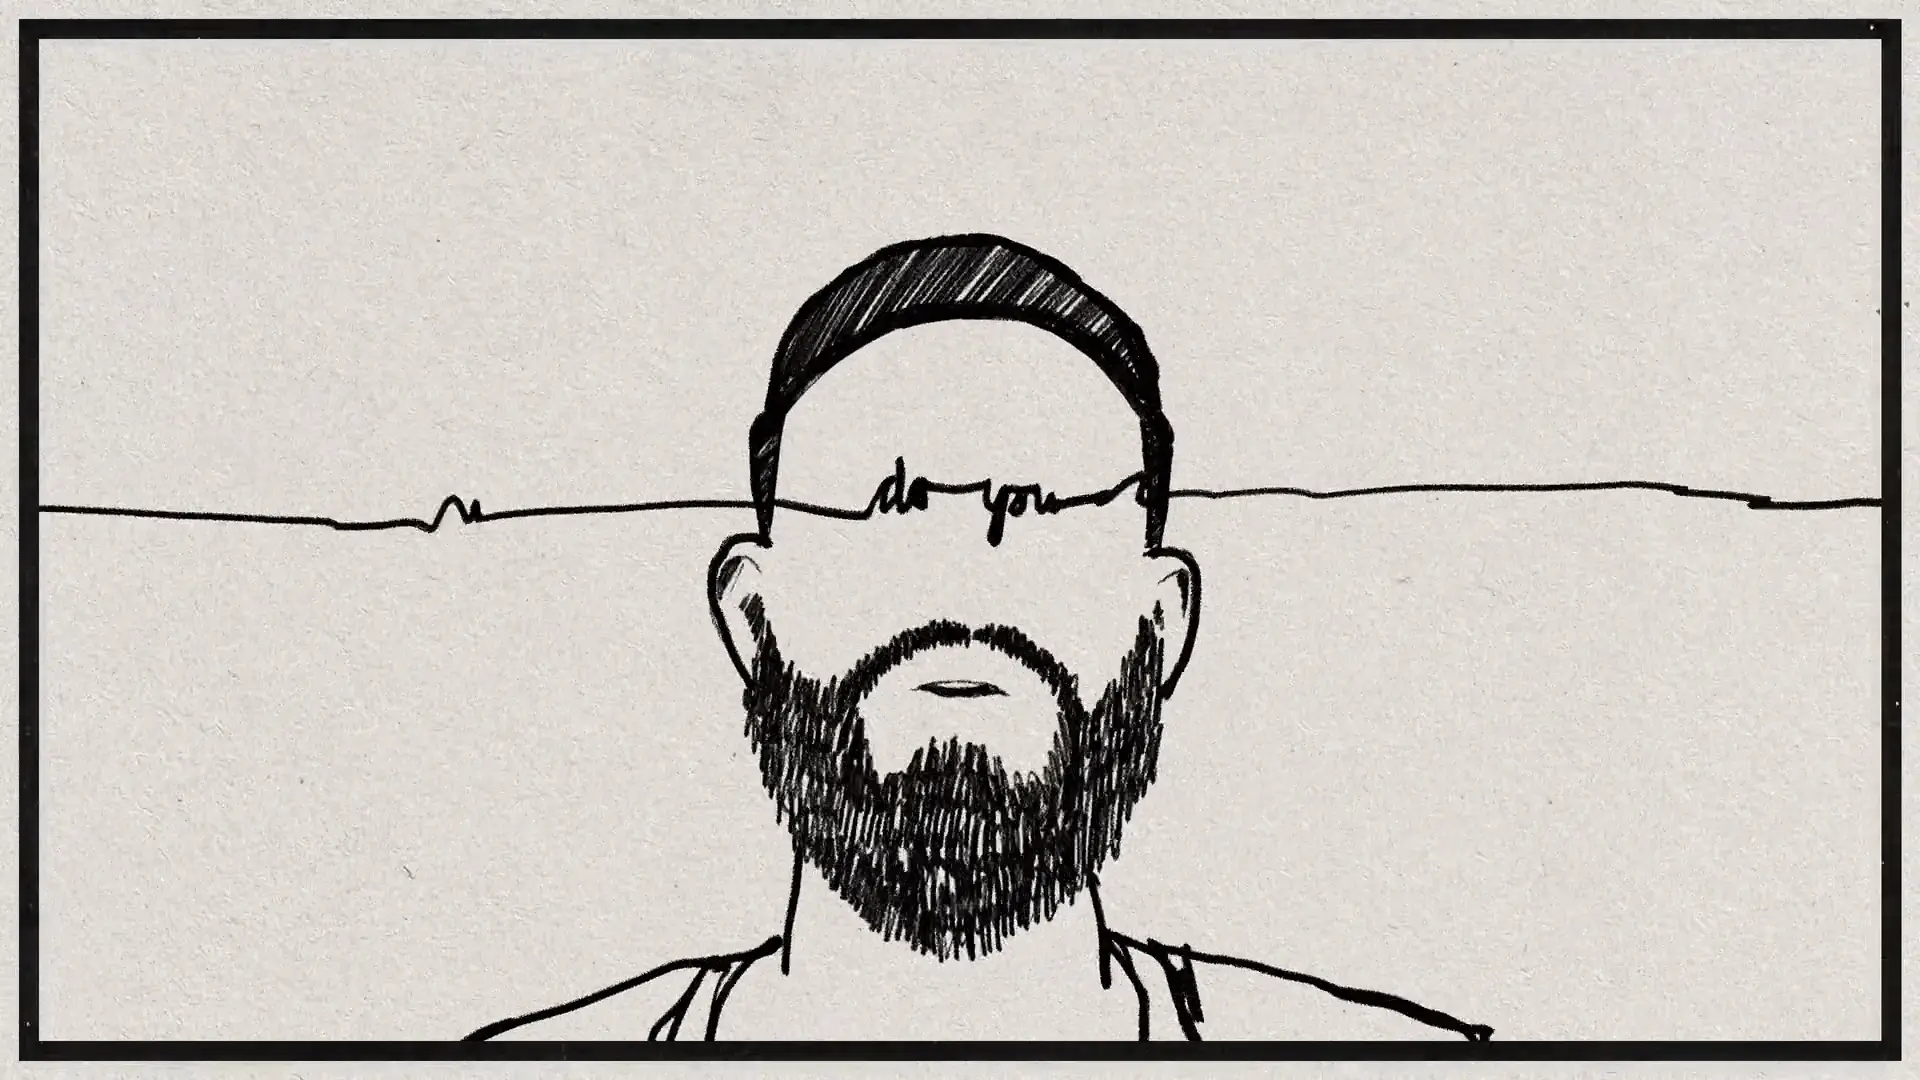 A screenshot from the music video 'Black & White' directed by Martyn Thomas. The image features a man depicted in a line art style, with music waveforms running across the image. The illustration is set against a textured paper background